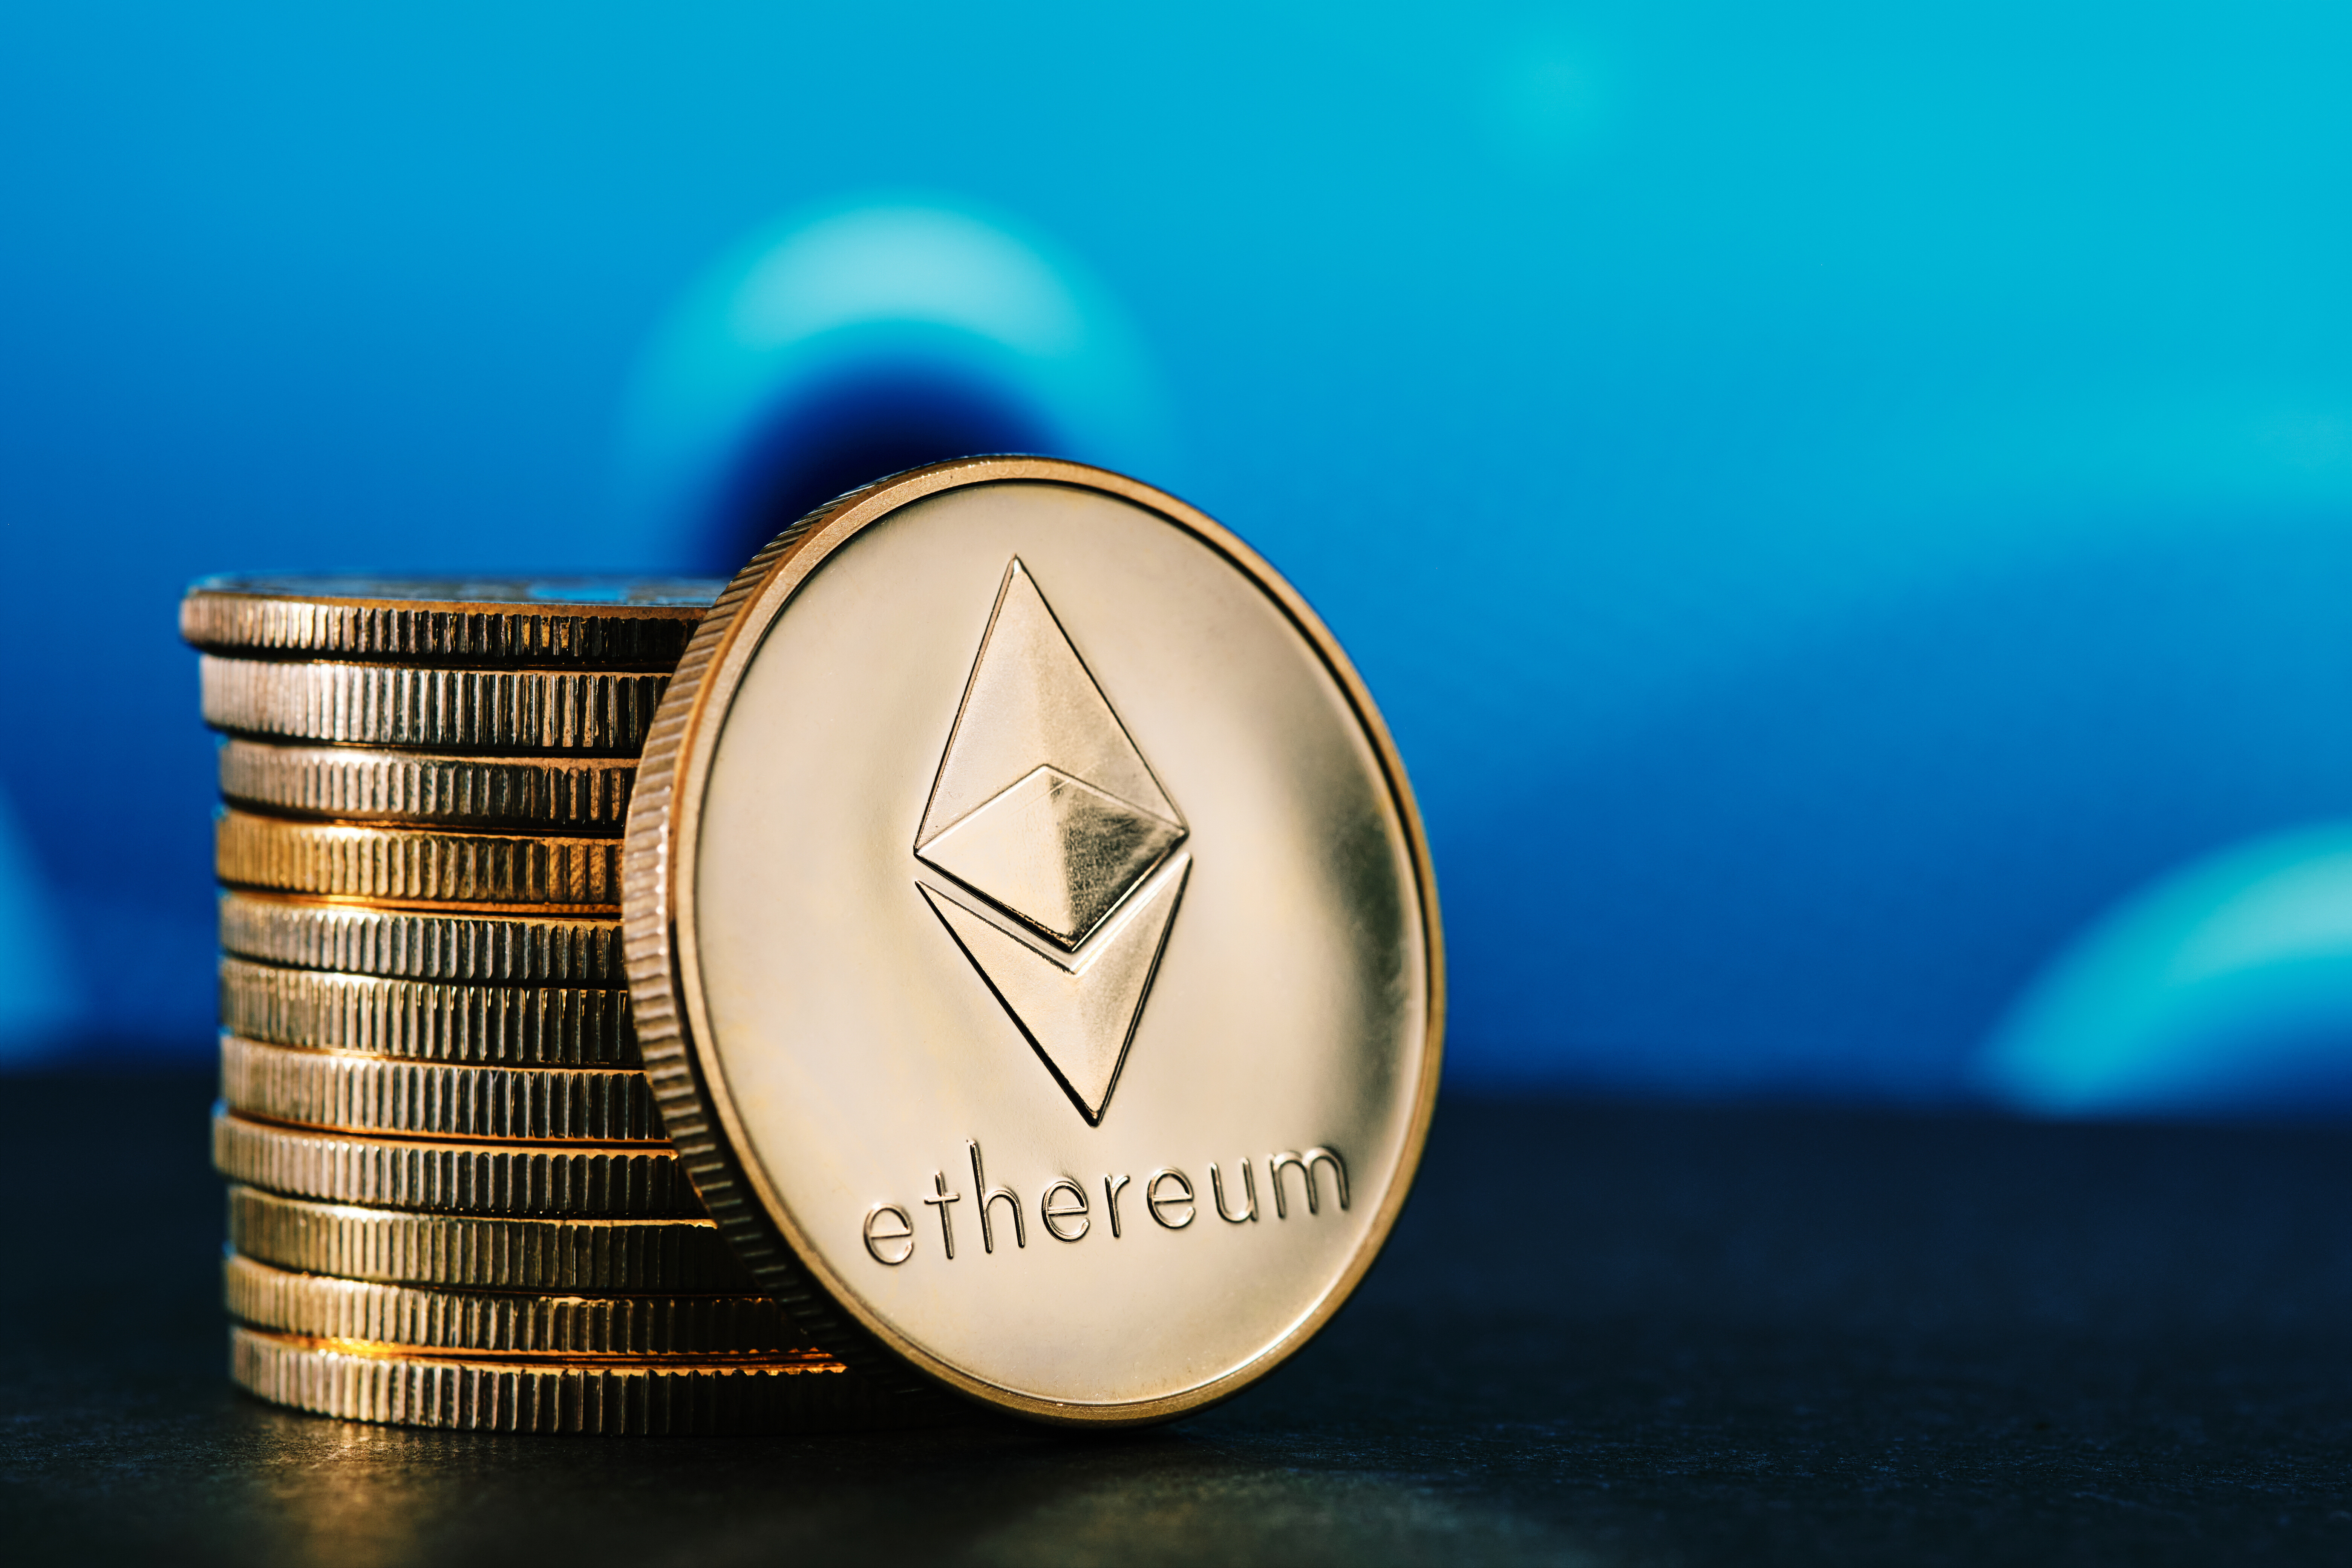 Demand for Ethereum Staking has Dropped Significantly – What's Going On?